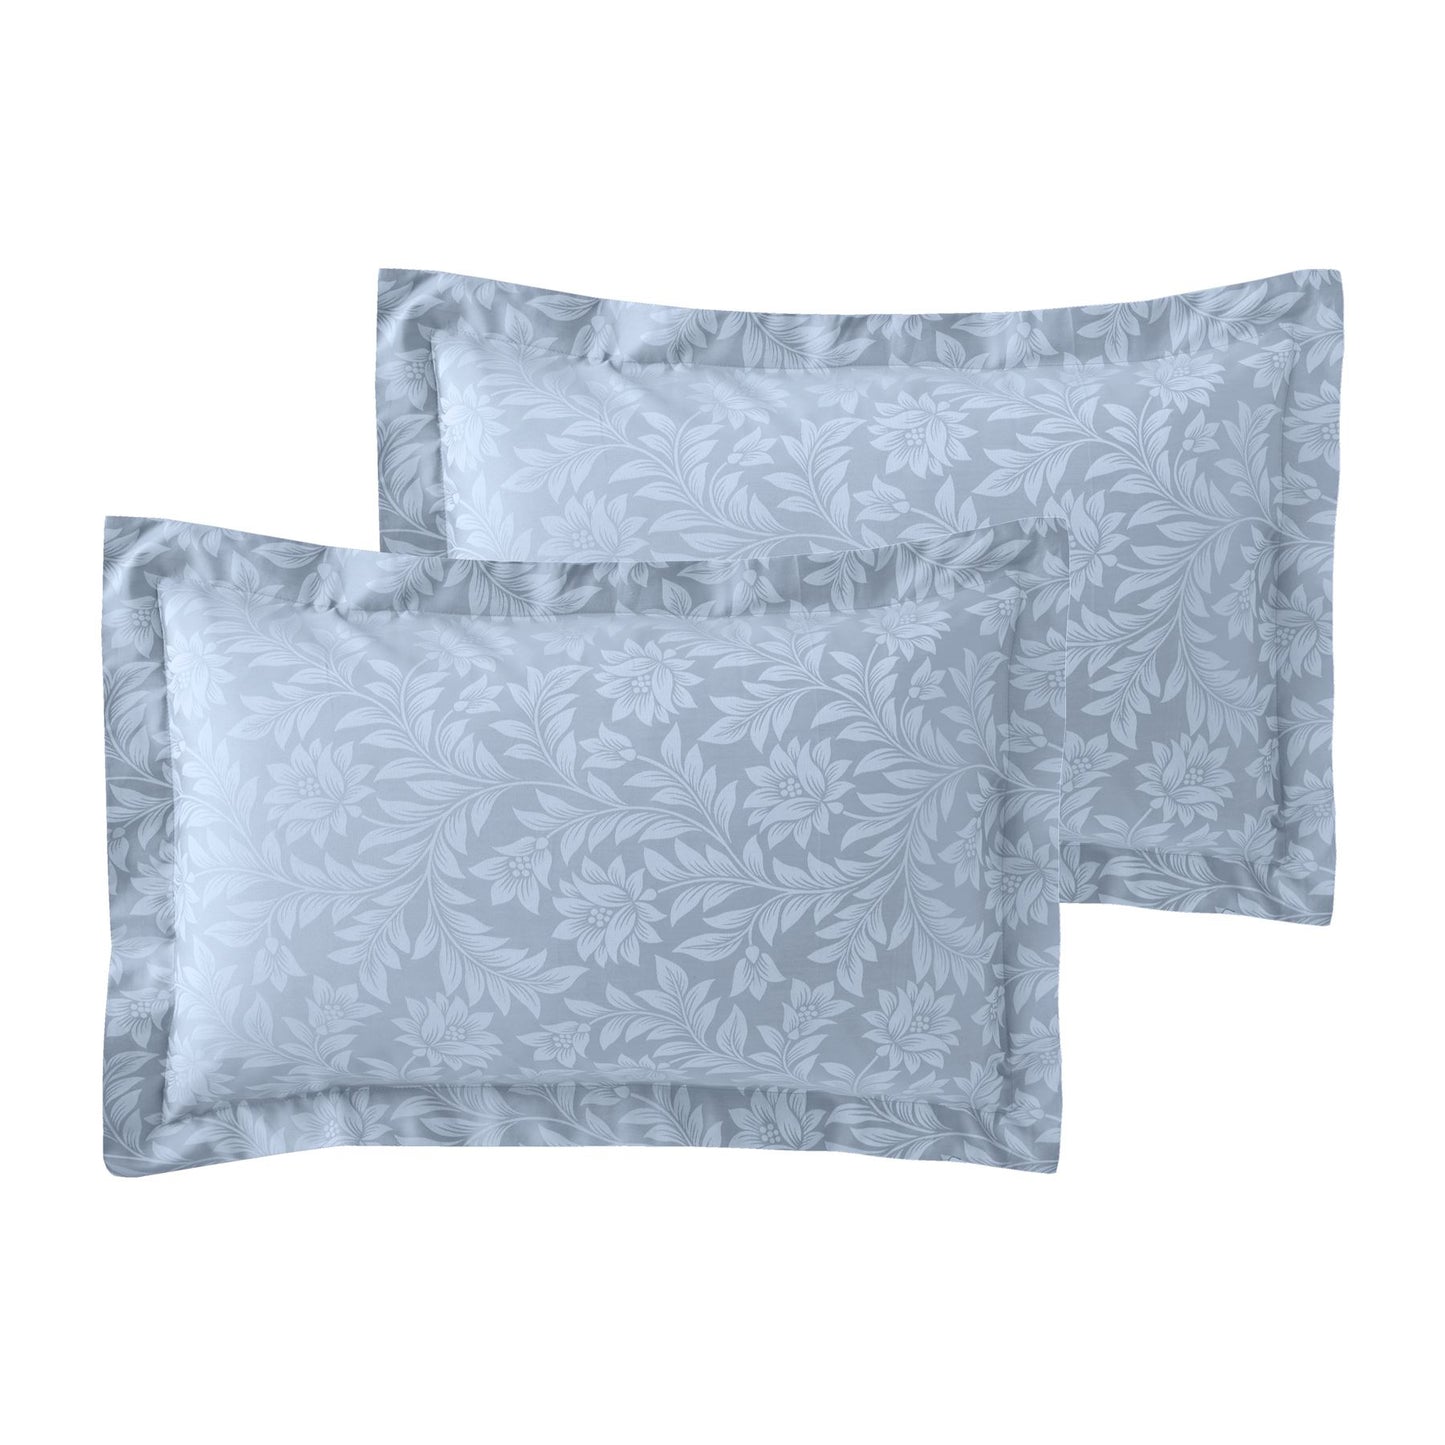 Sleep in Style with a Floral Jacquard Cotton Rich Duvet Set